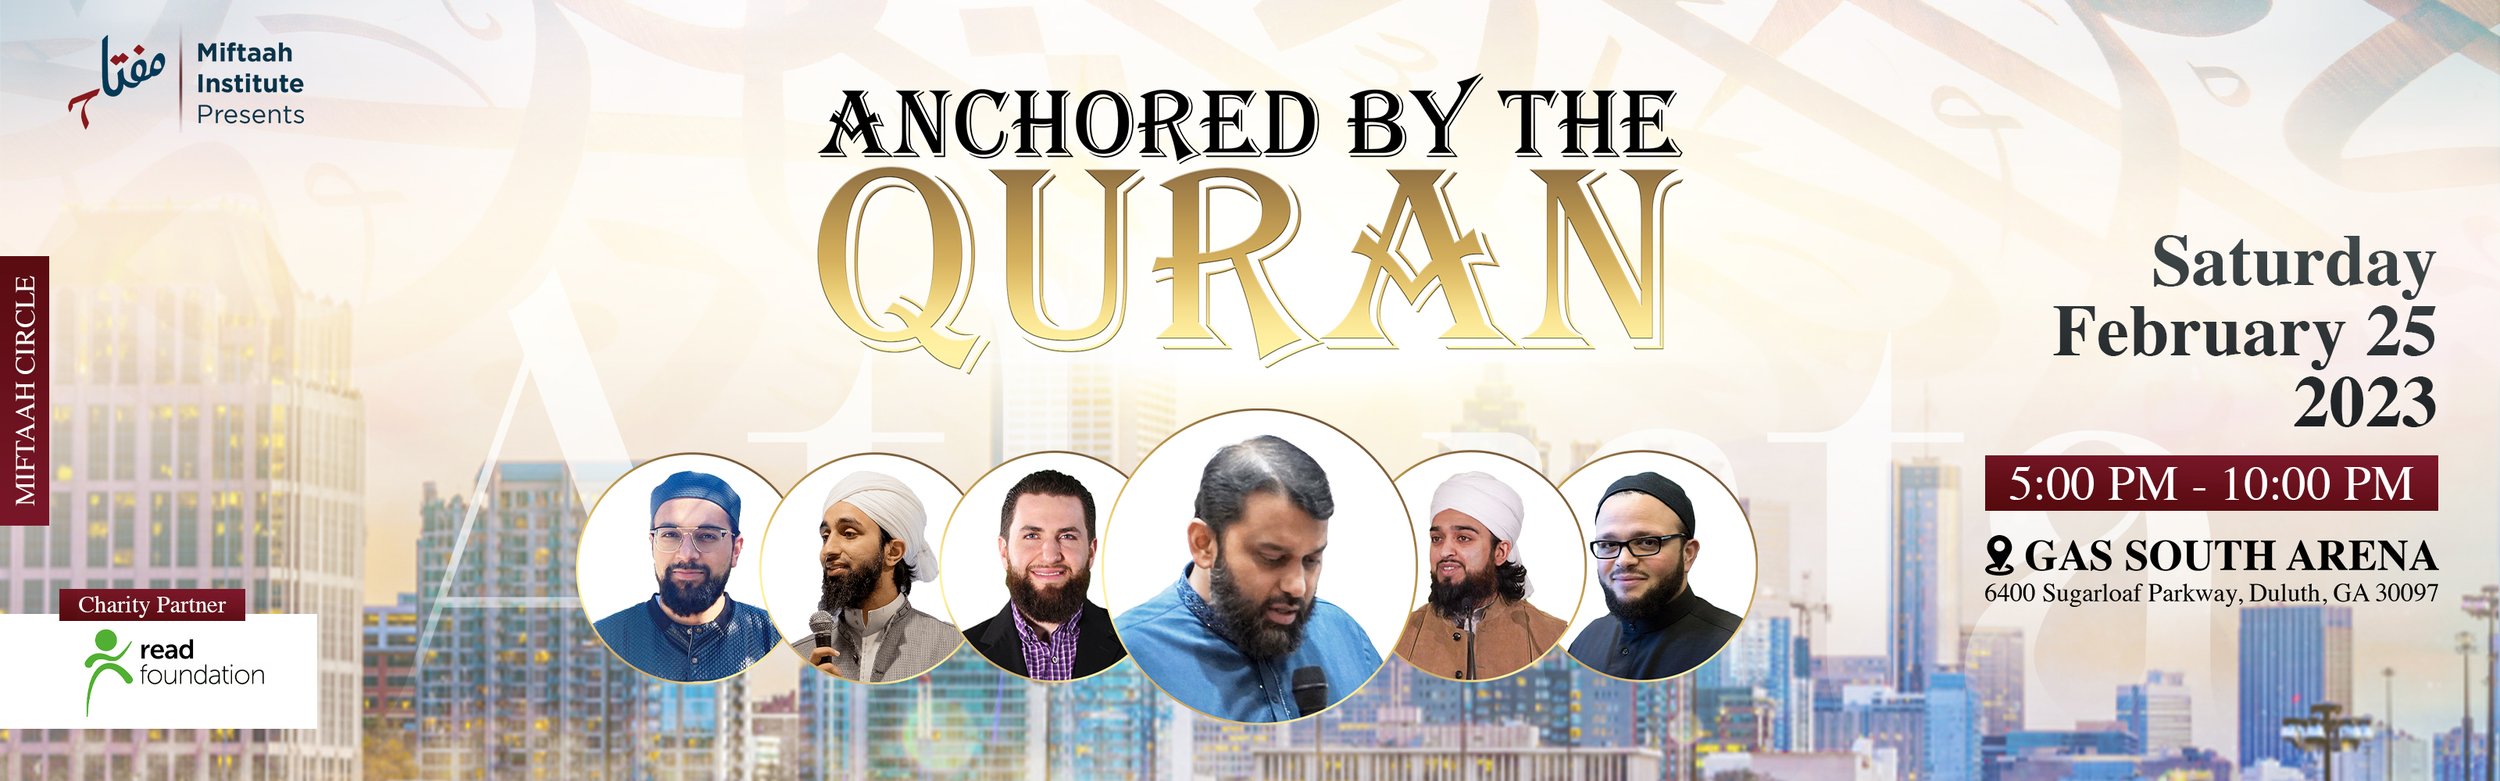 ANCHORED BY THE QURAN